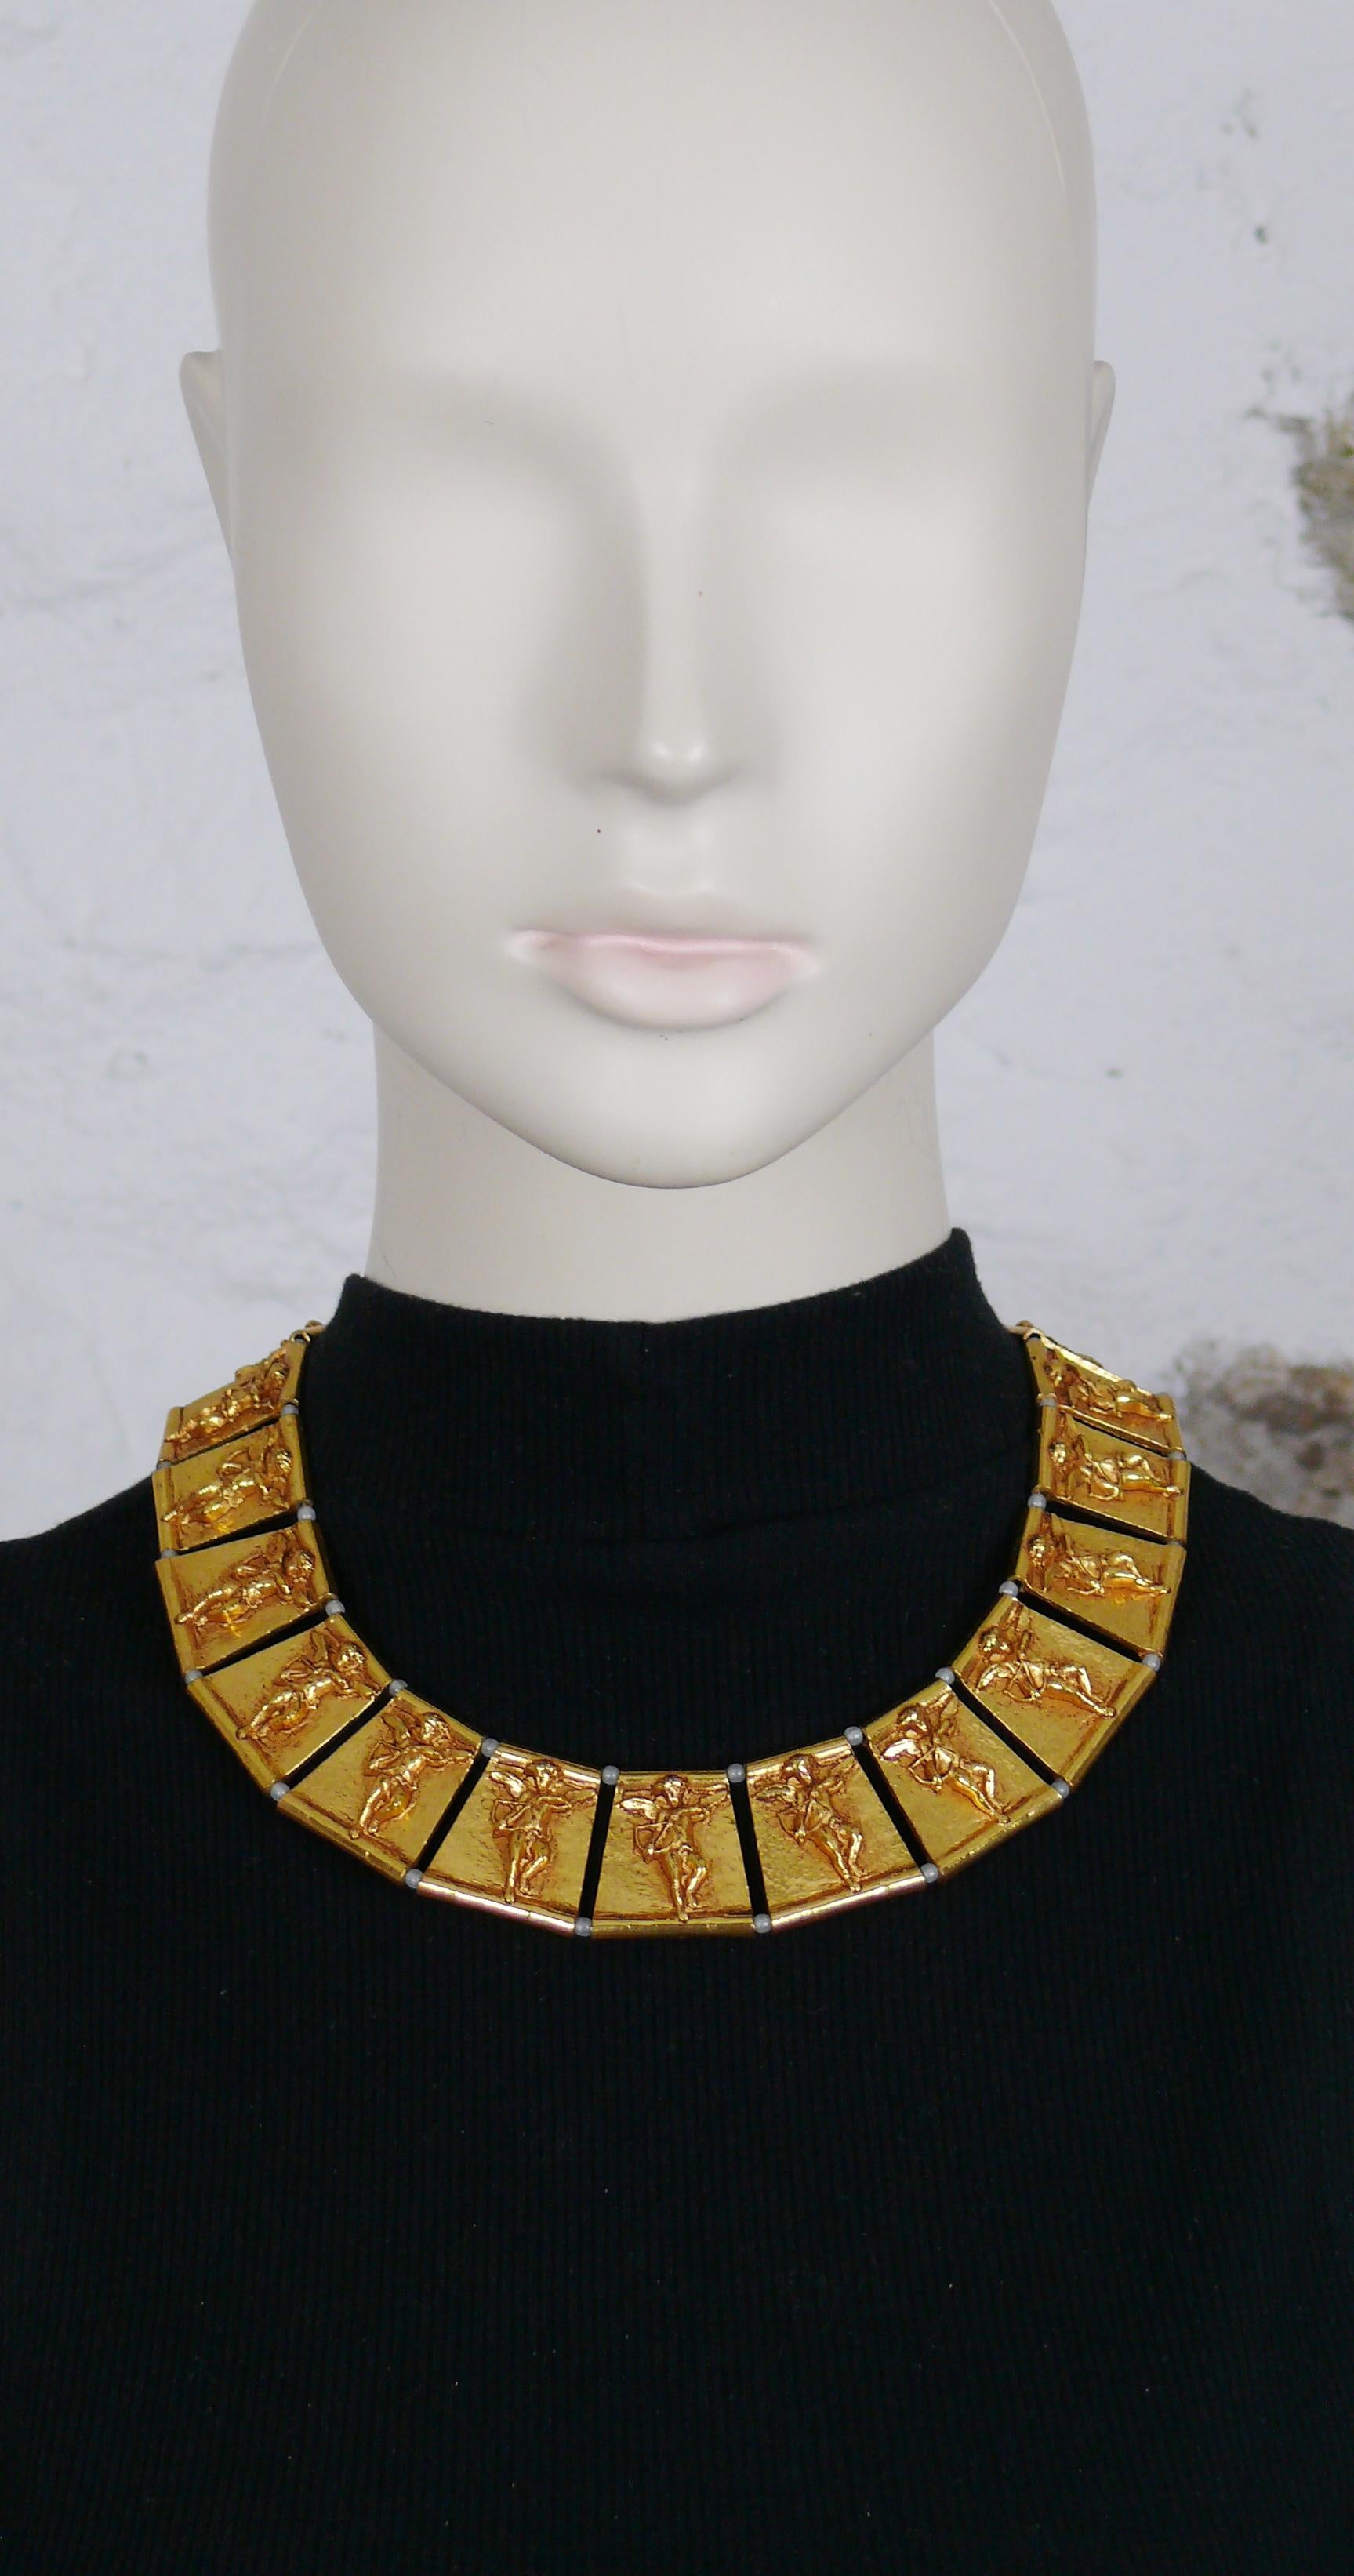 XAVIER LOUBENS vintage antiqued gold toned collar necklace featuring gorgeous links embossed with 3-dimensional cupids, alterning with milky color beads (originally nacre faux pearls).

Lovely clasp embellished with a square clear crystal.
Push